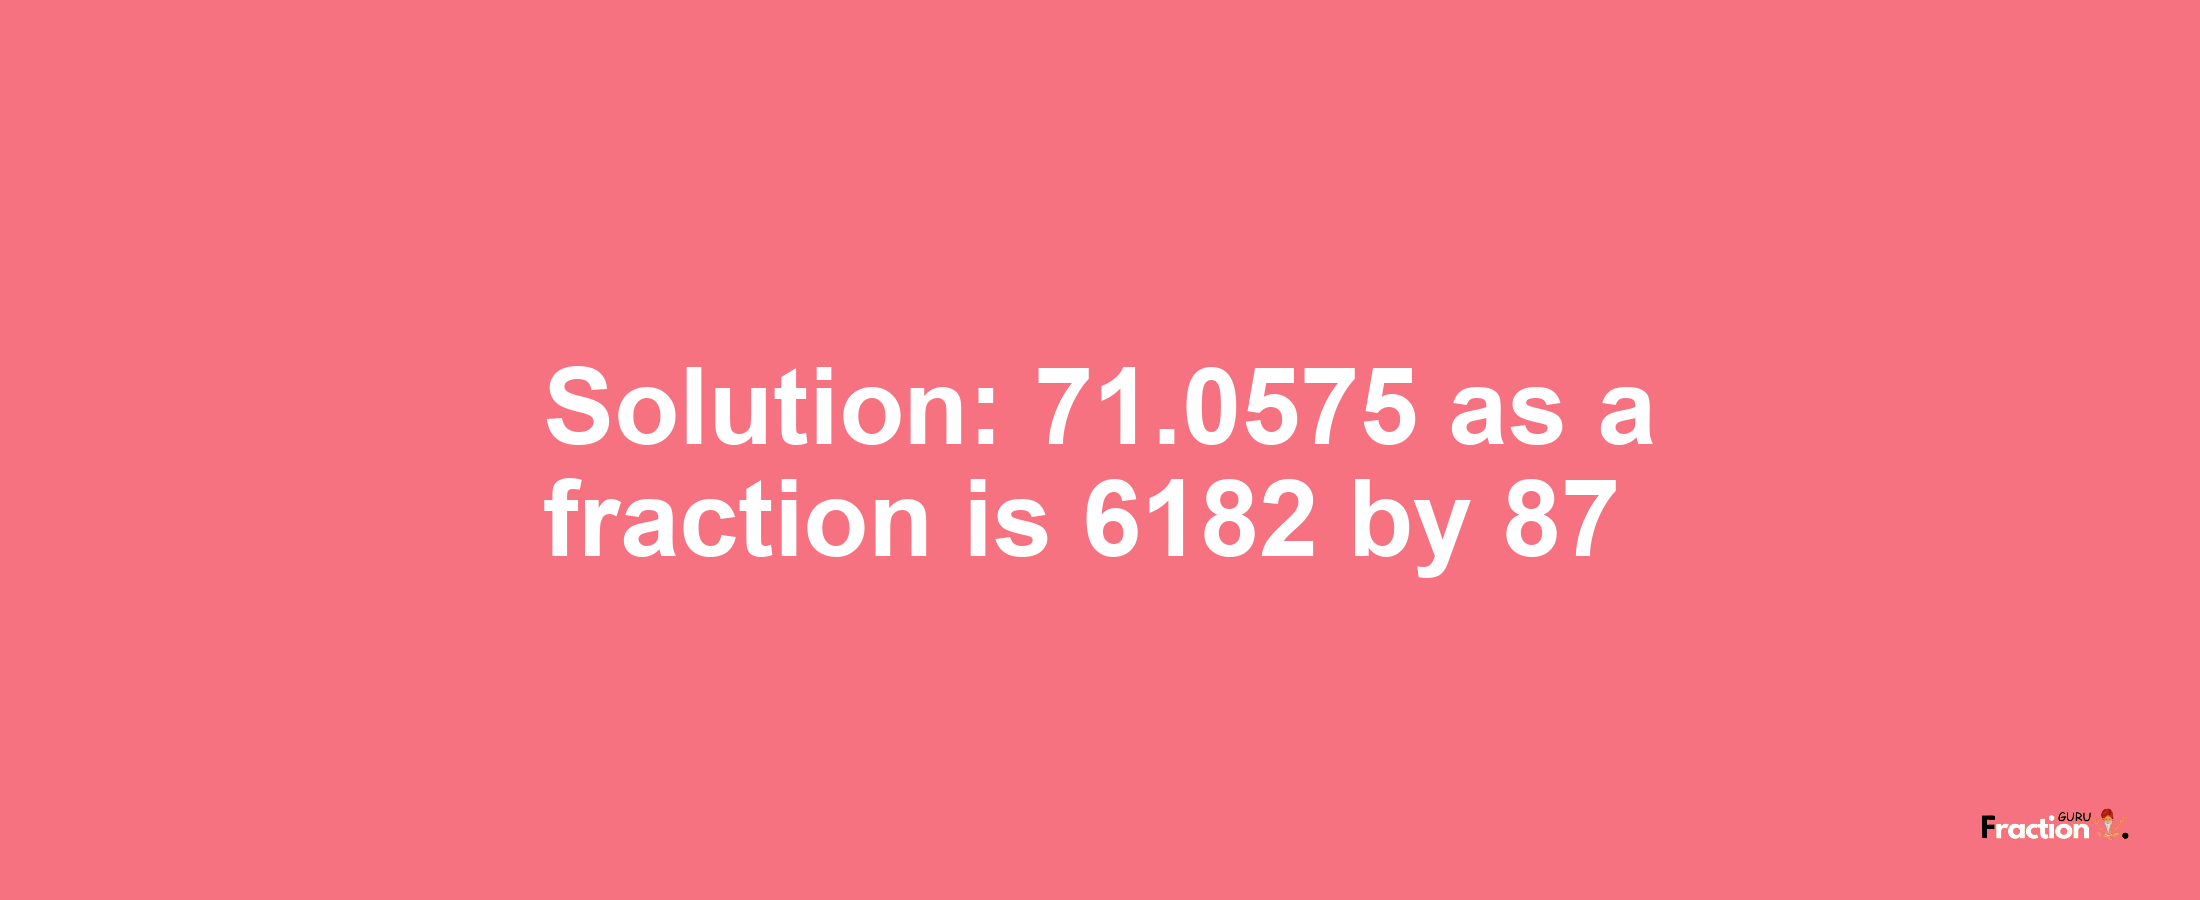 Solution:71.0575 as a fraction is 6182/87